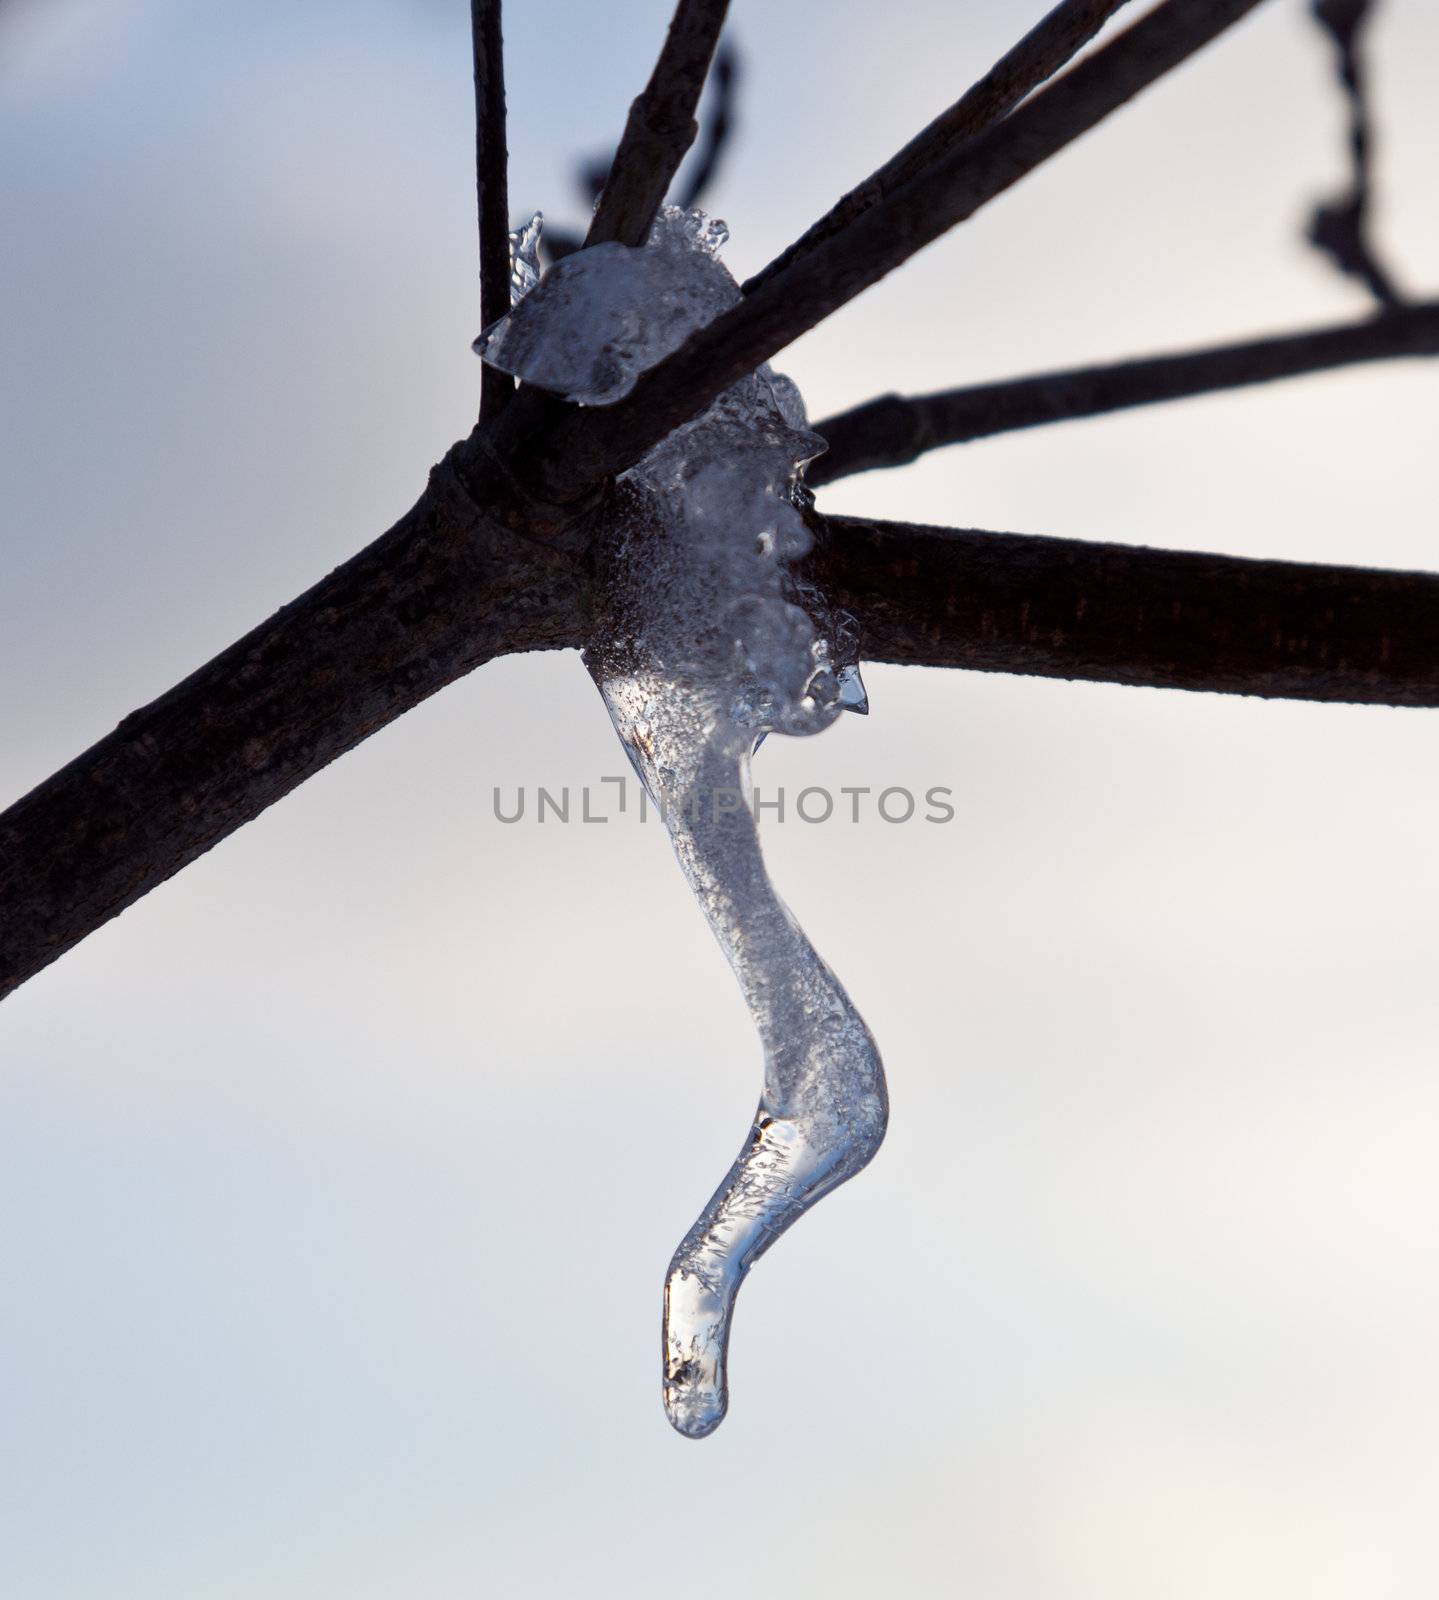 Ornate icicle dripping from a tree branch by steheap